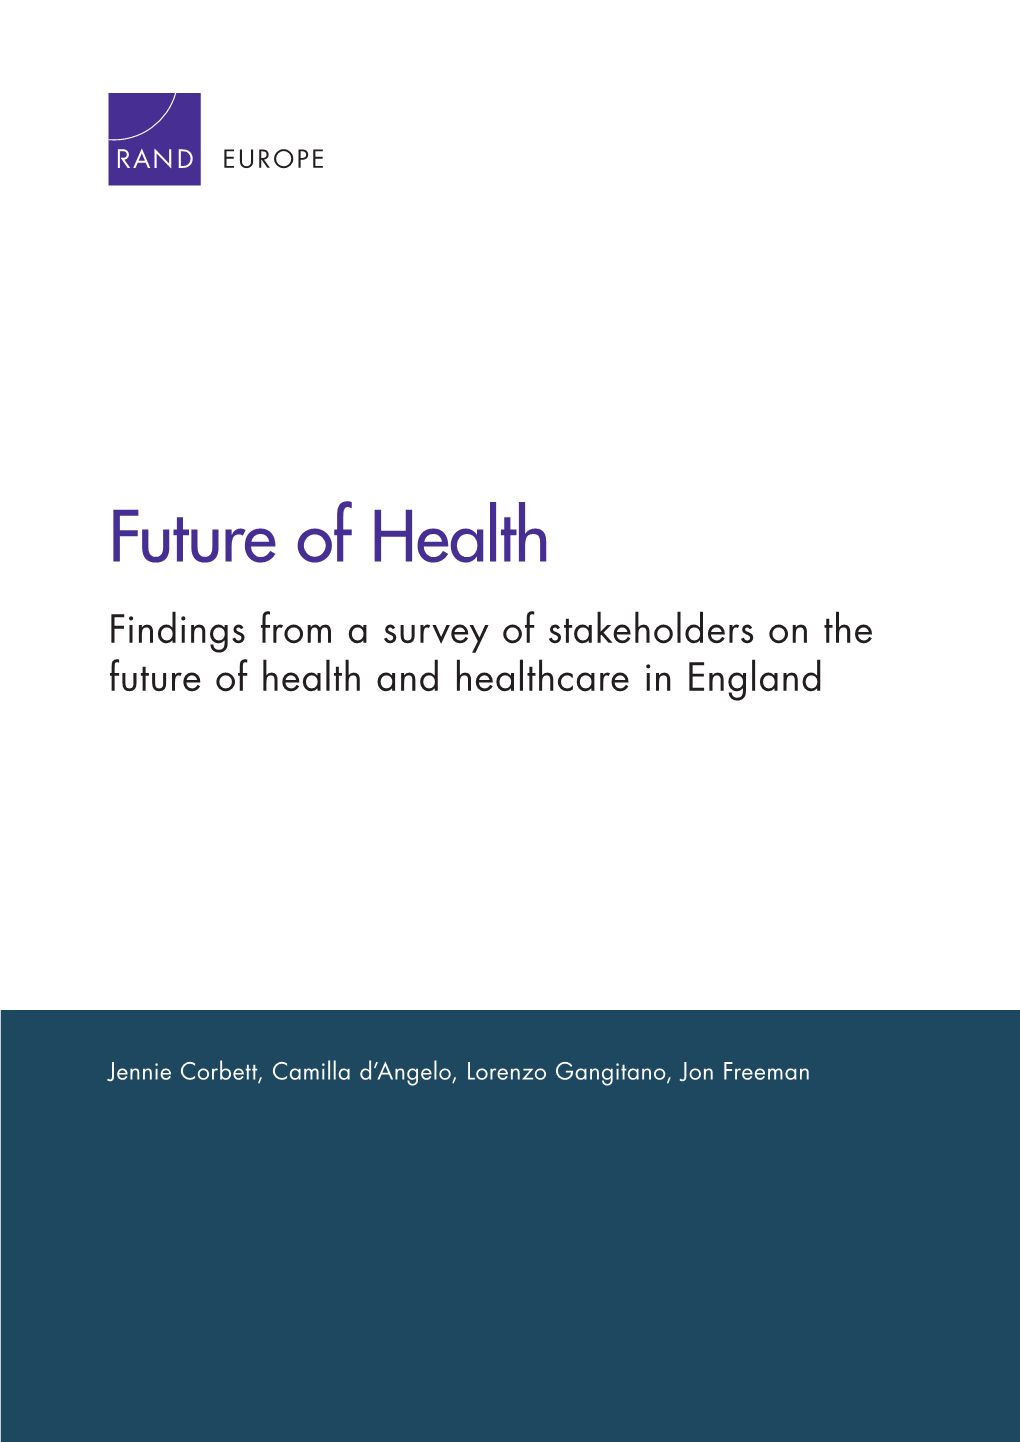 Future of Health Findings from a Survey of Stakeholders on the Future of Health and Healthcare in England